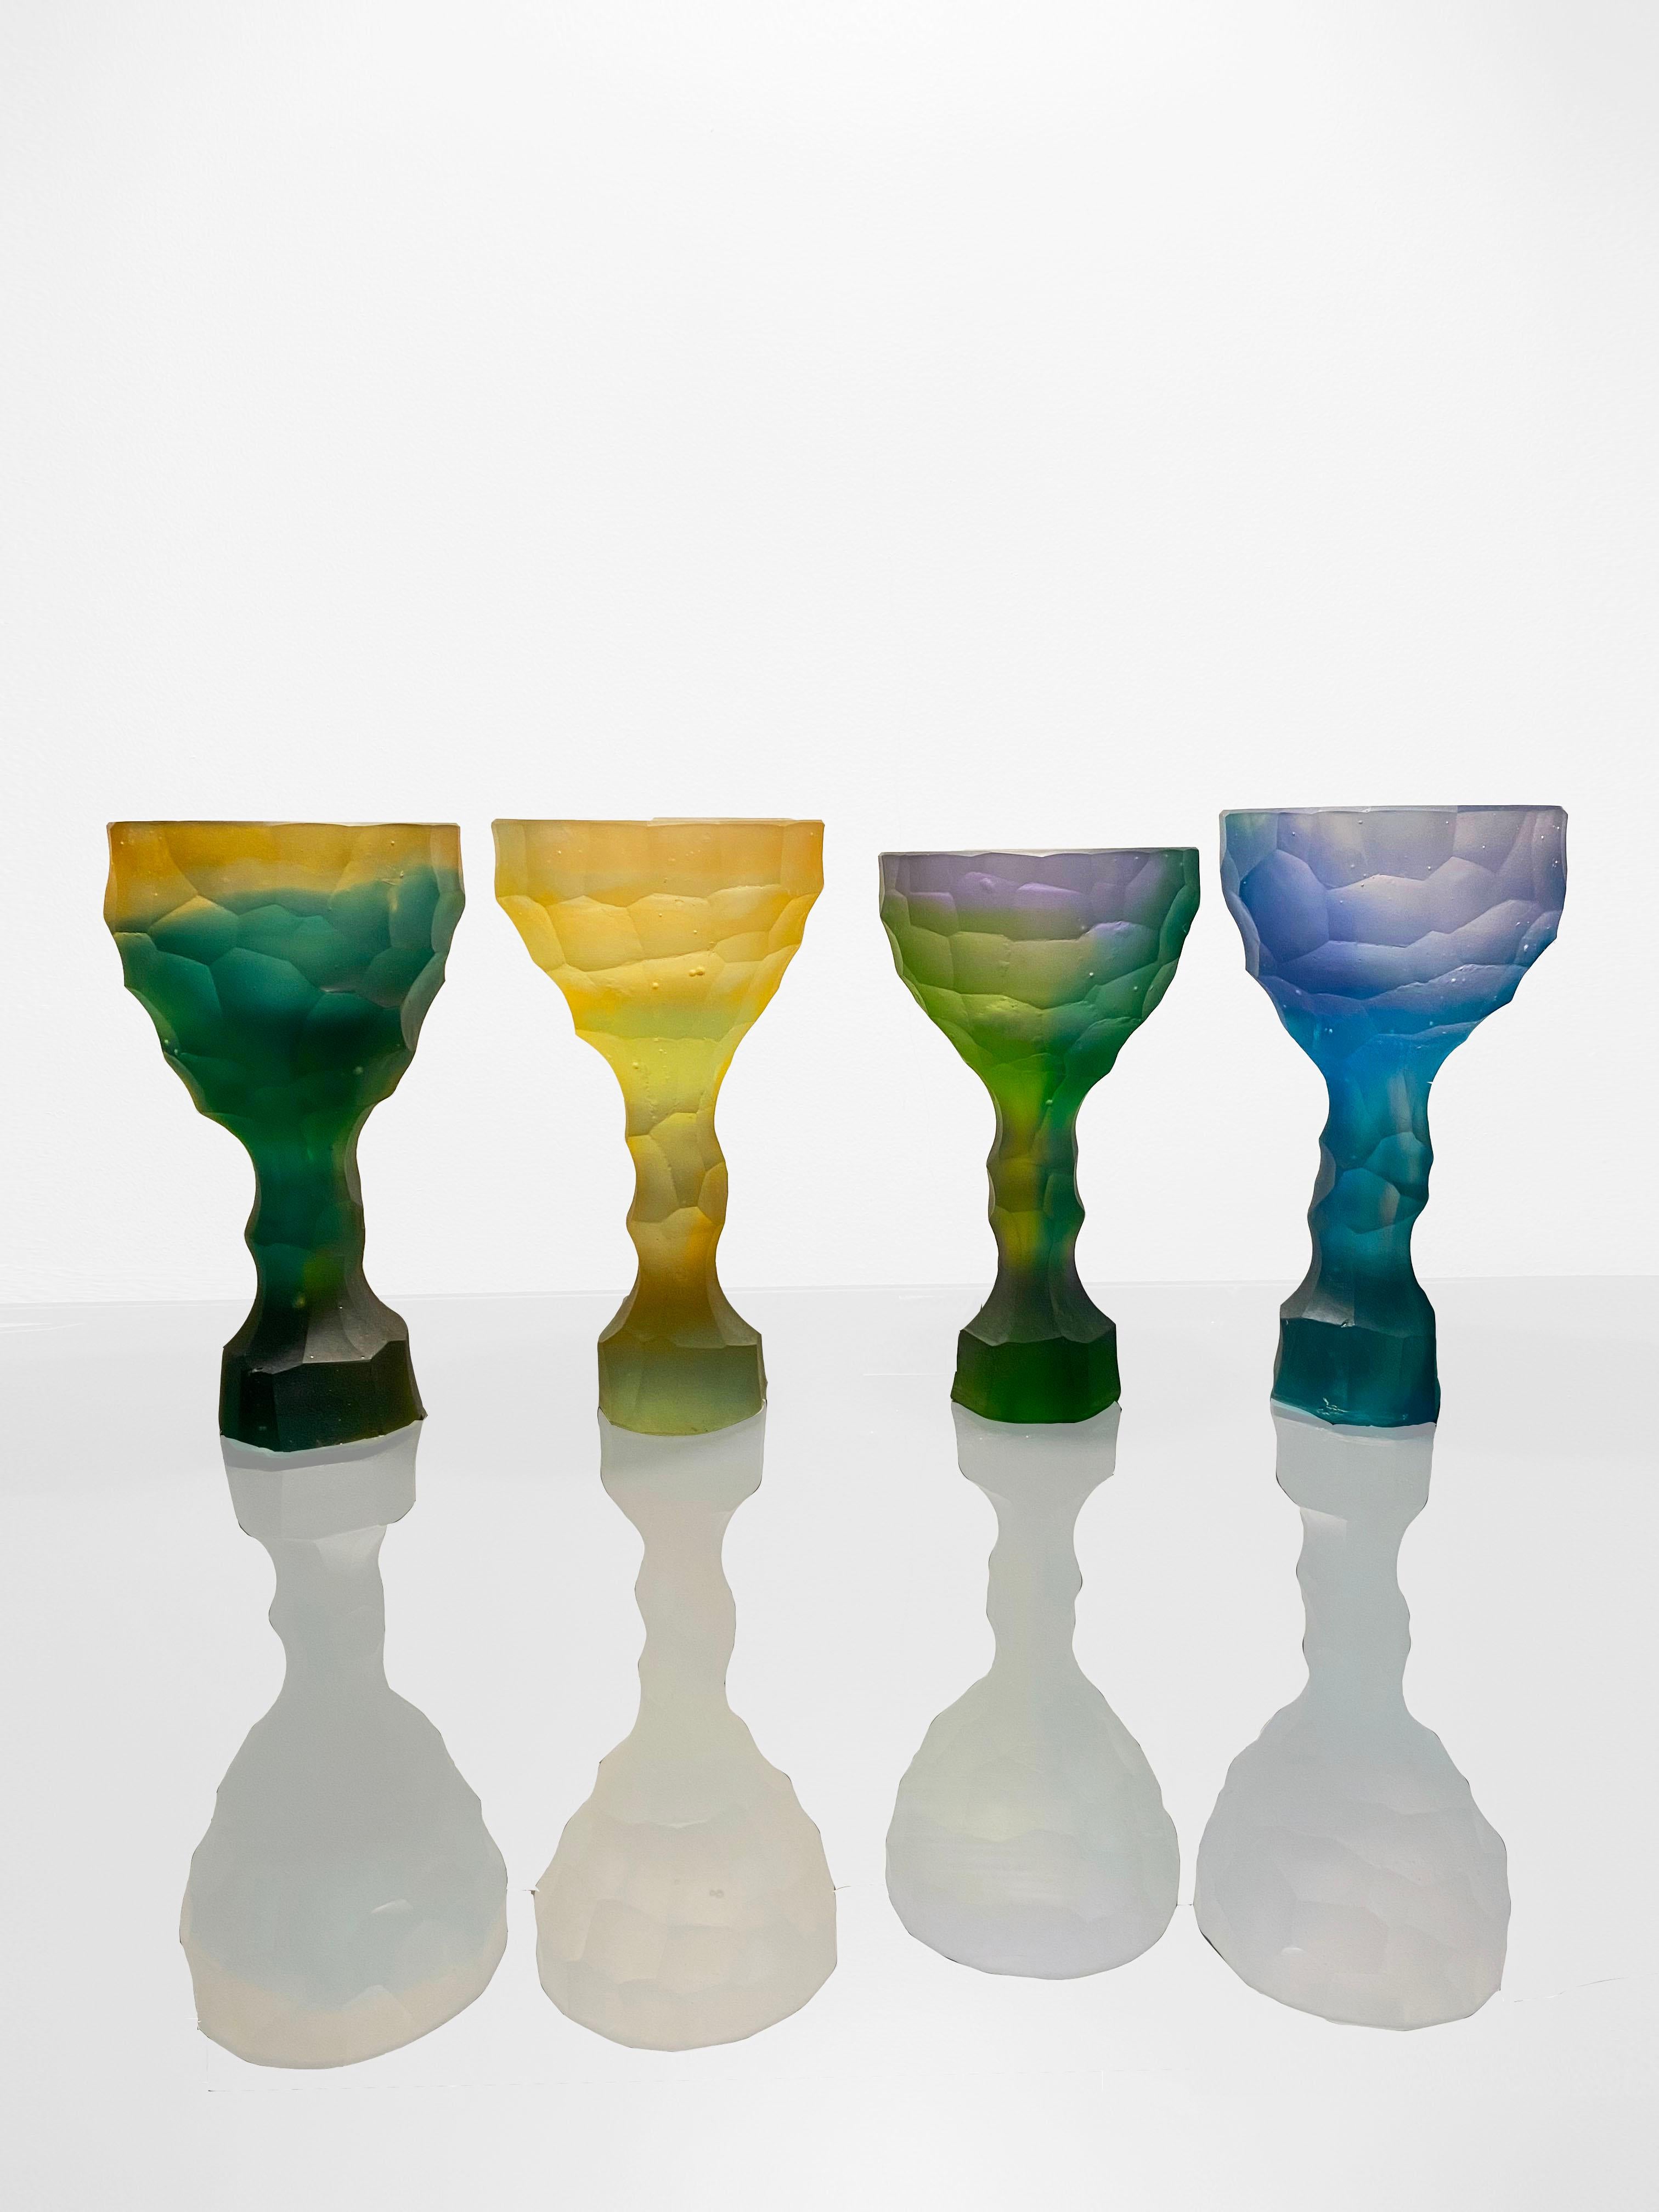 Contemporary Green and Orange Hand-Sculpted Crystal Glass by Alissa Volchkova